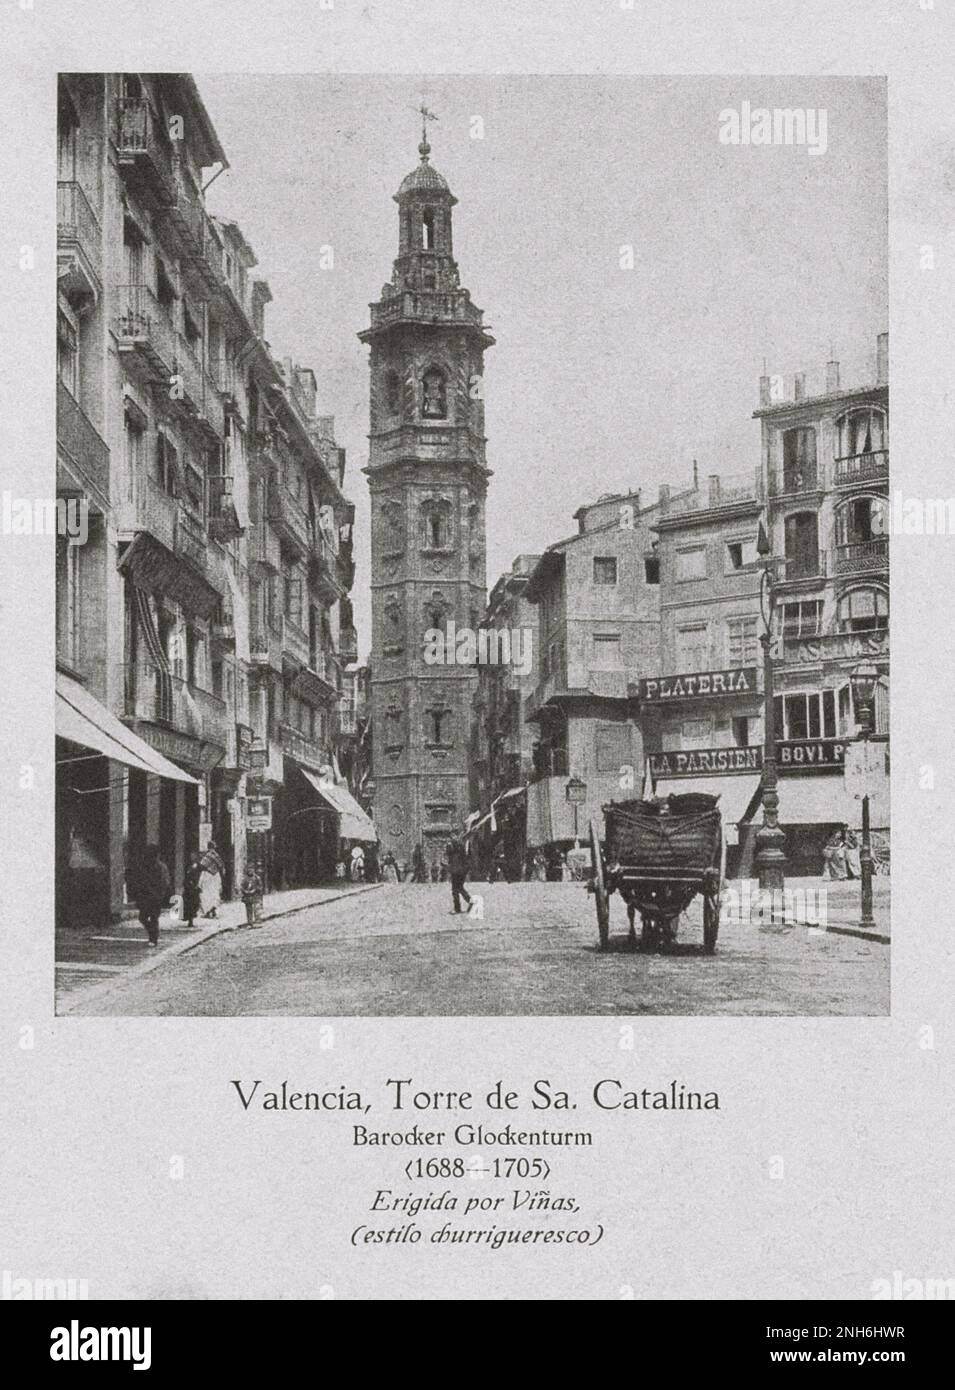 Architecture of Old Spain. Vintage photo of Santa Catalina (Torre de Sa. Catalina), Baroque belfry. Valencia.  Santa Catalina is a Gothic-style, Roman Catholic church located in the city of Valencia, Spain at the southern end of Plaza de la Reina. Stock Photo